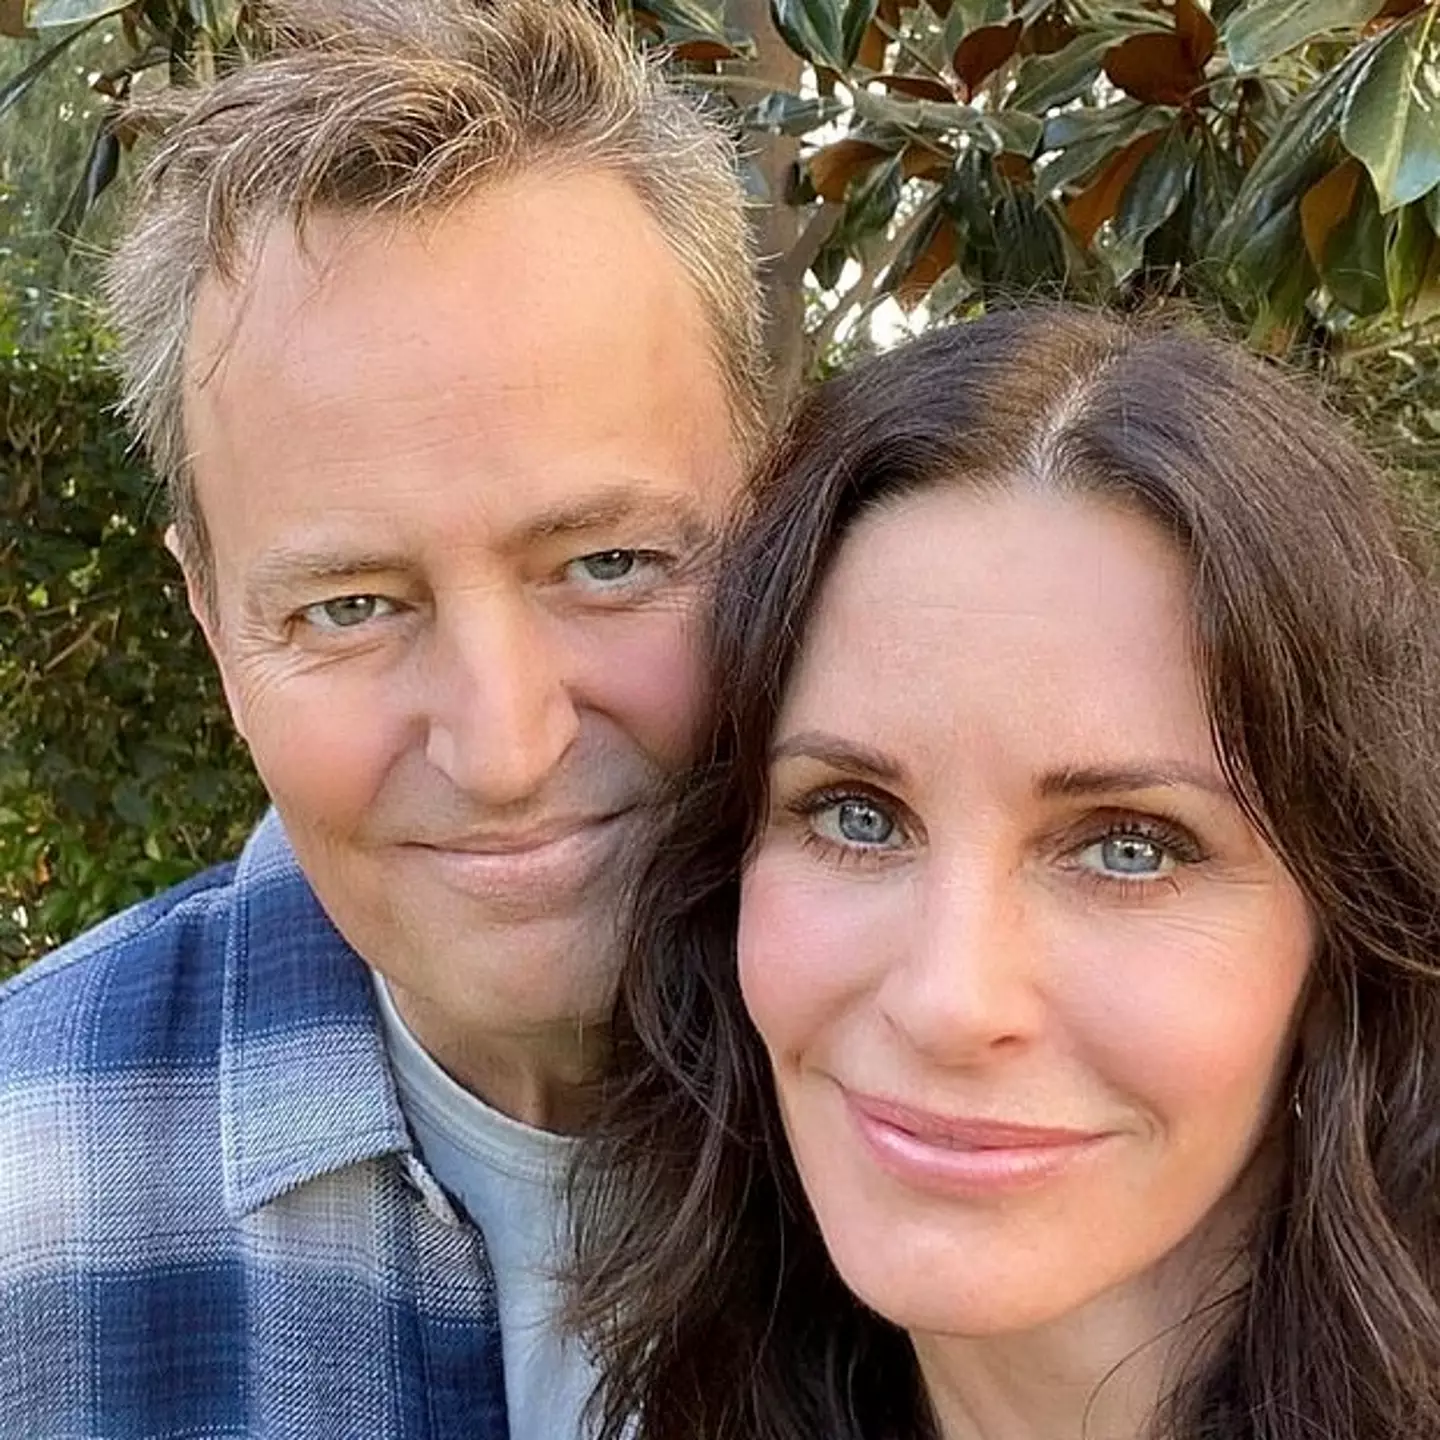 Courteney and Matthew starred alongside each other for 10 years. (Instagram/courteneycoxofficial)